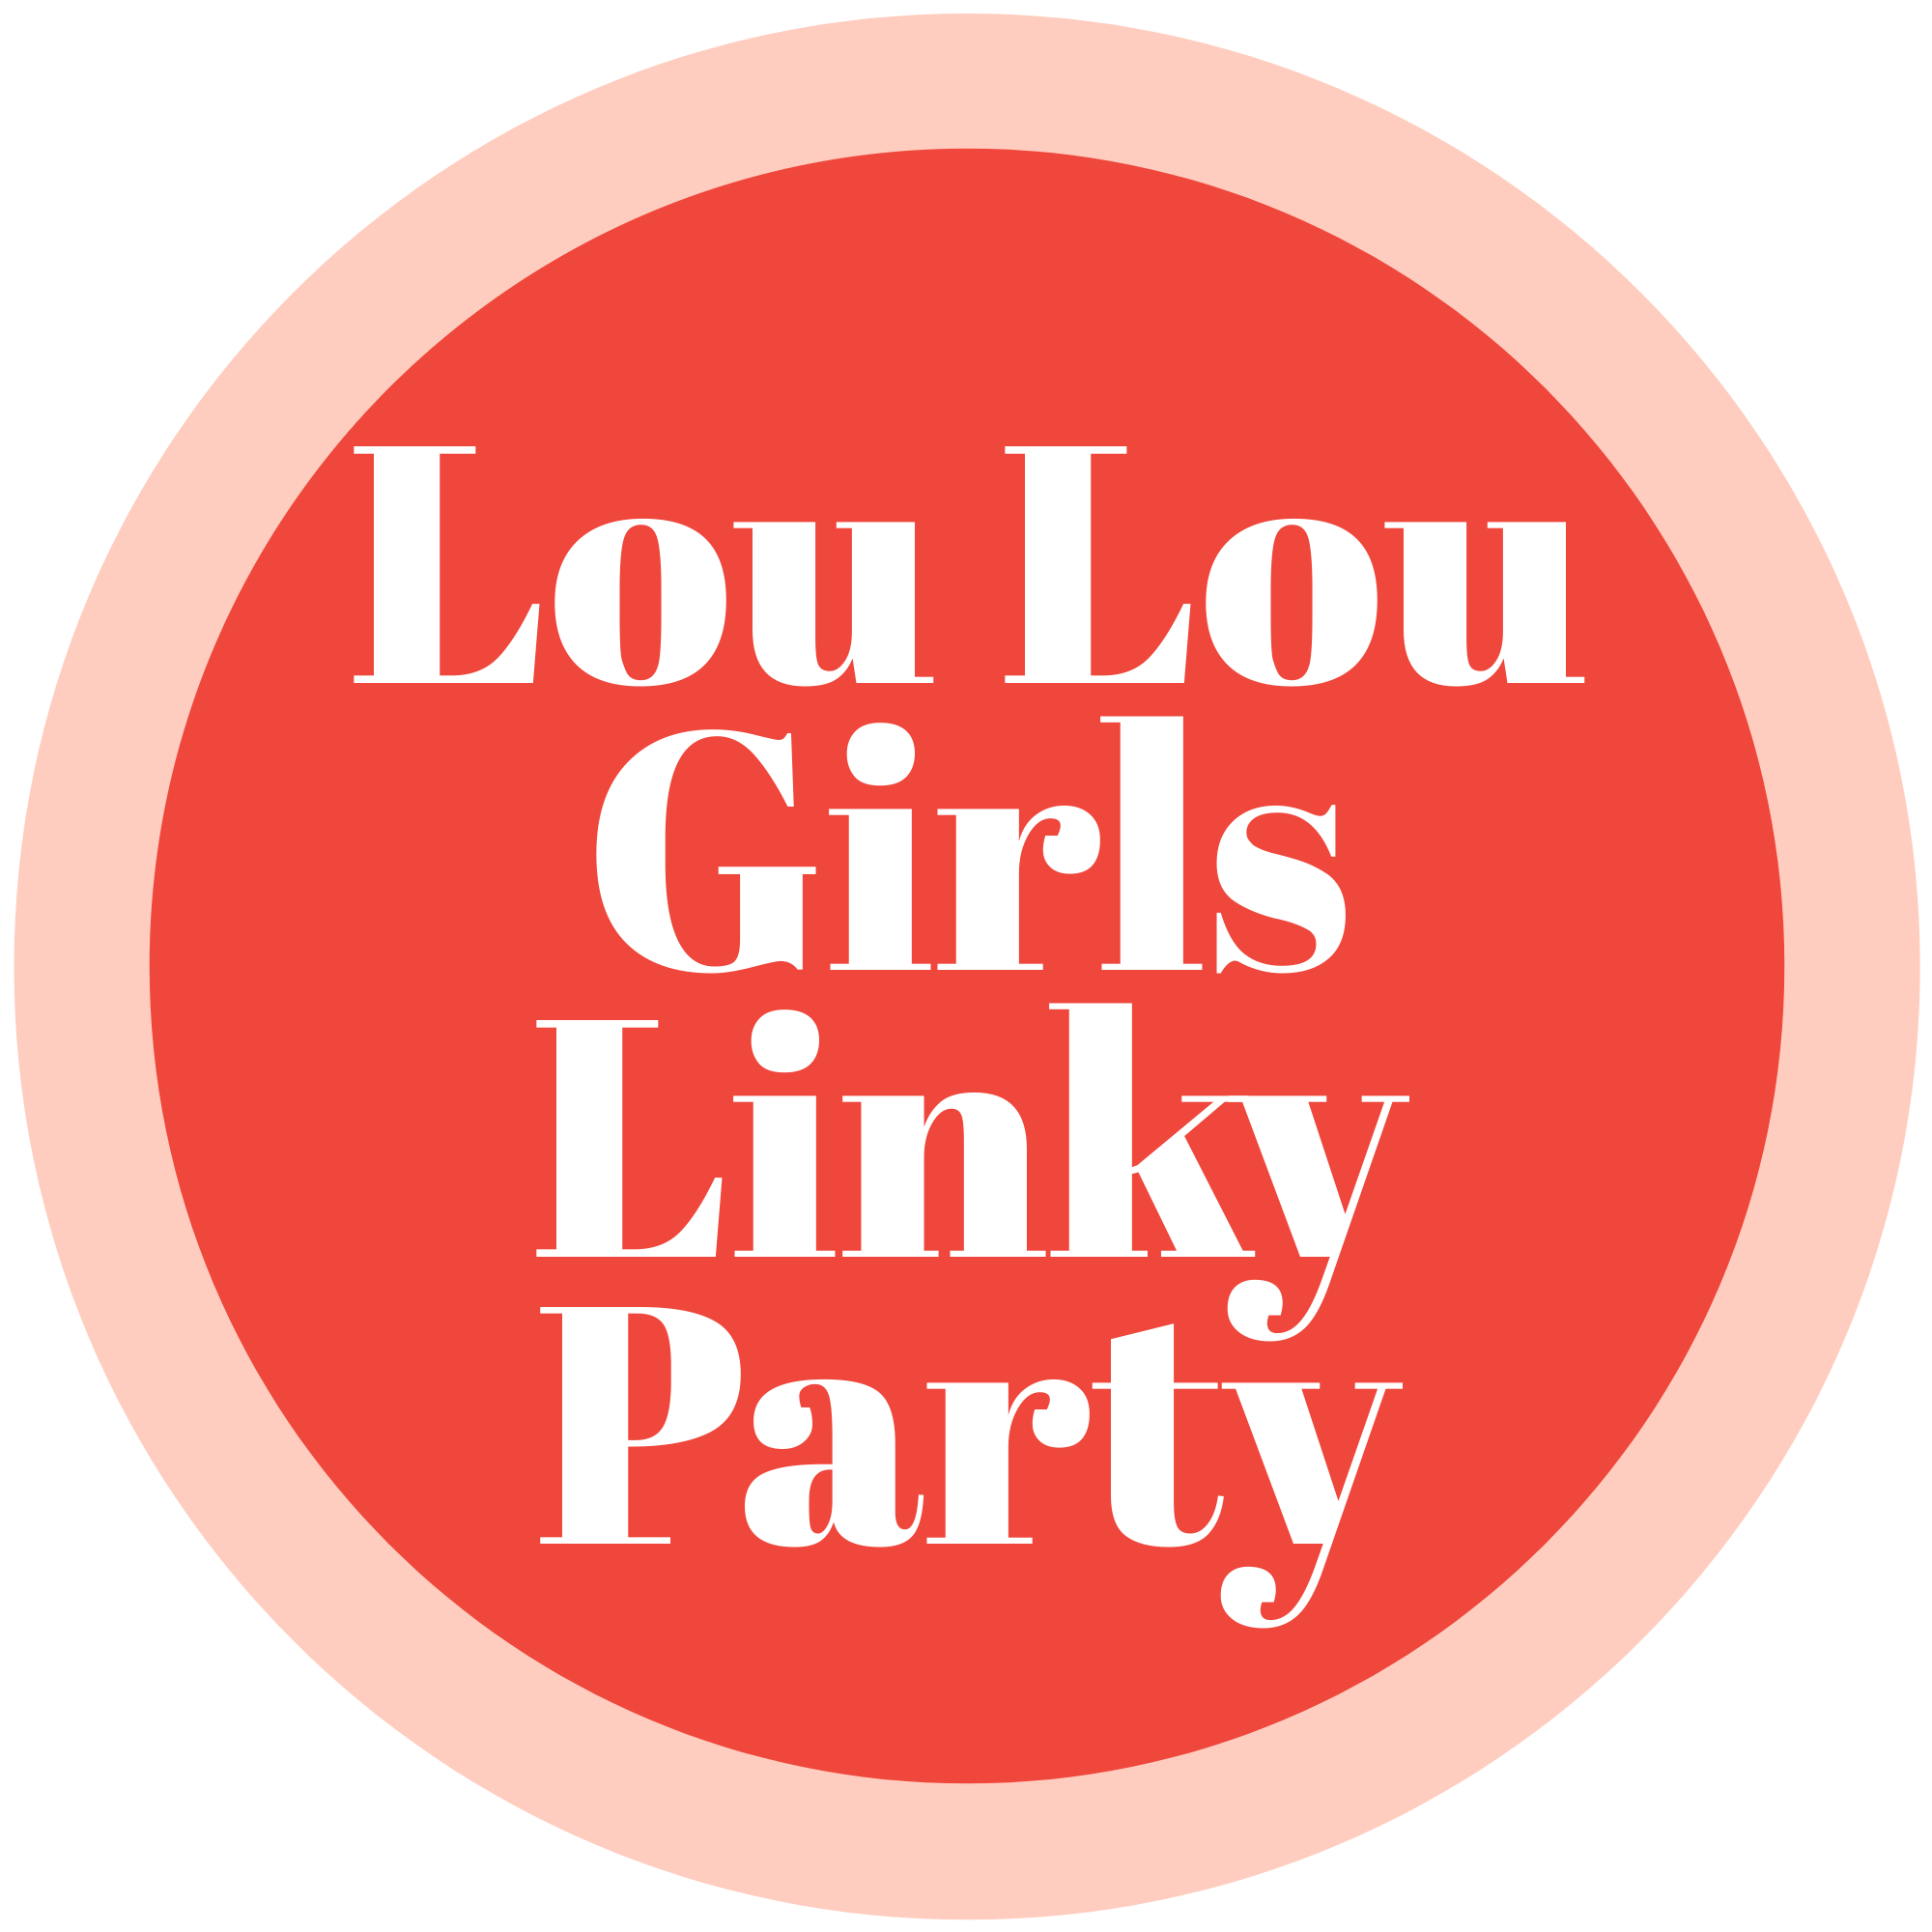 Lou Lou Girls Fabulous Party 482 #linkyparty #bloghop #linkyparties